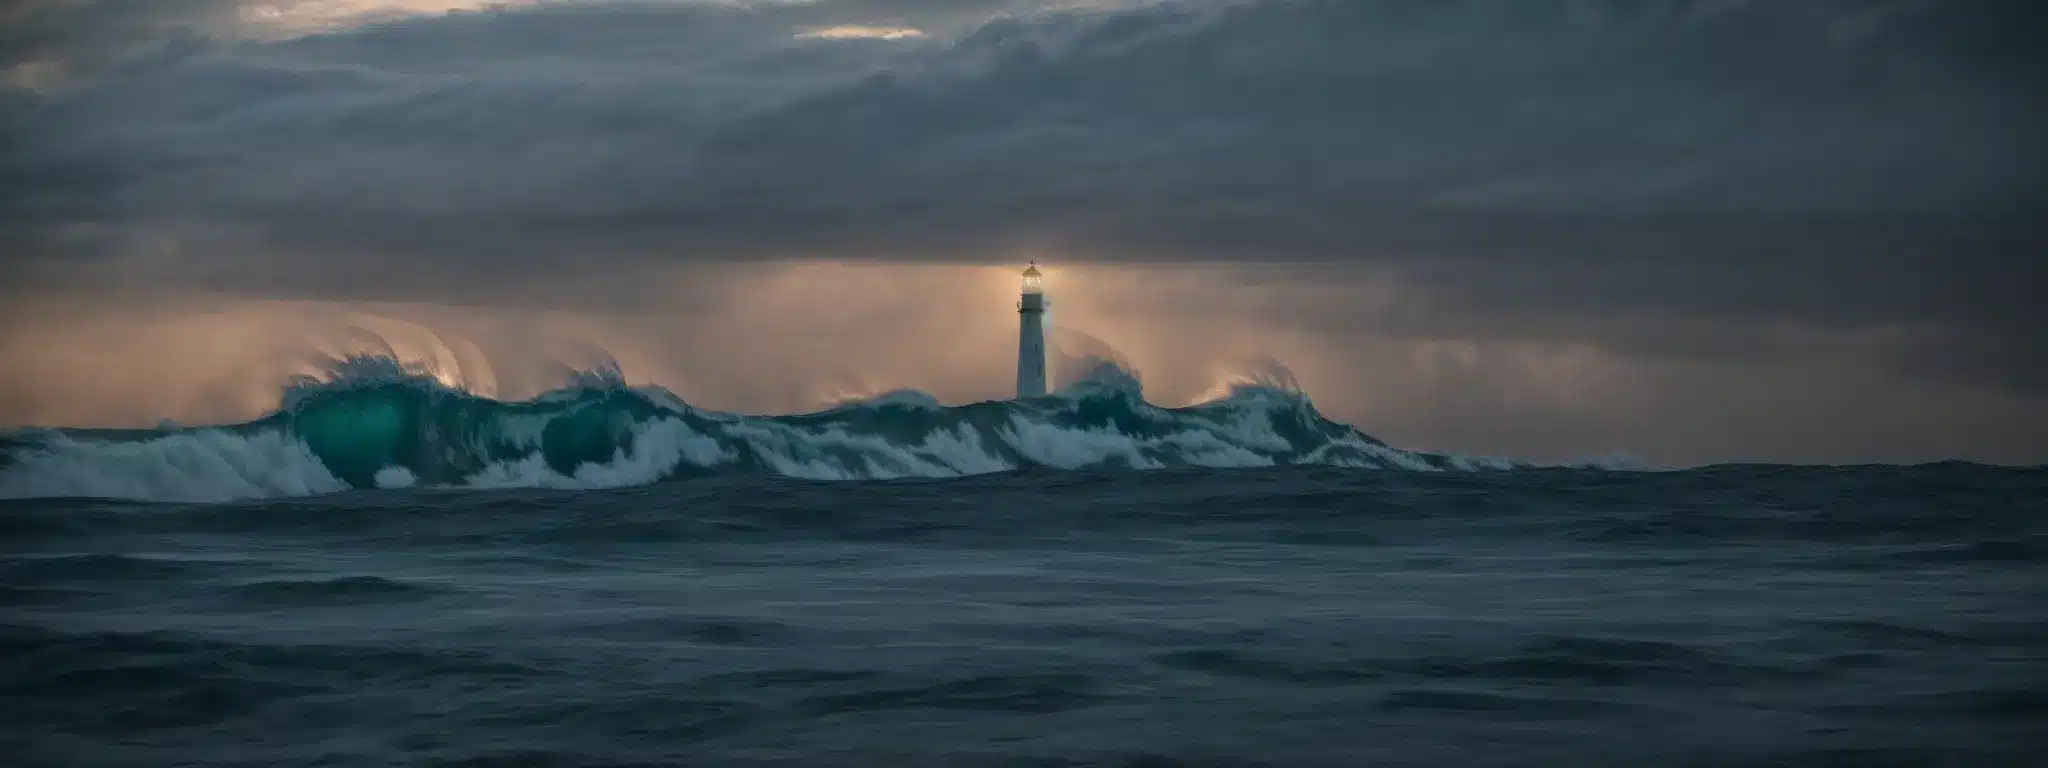 A Towering Lighthouse Beams Light Over Tumultuous Seas At Dusk, Symbolizing Guidance And Visibility In Uncharted Waters.